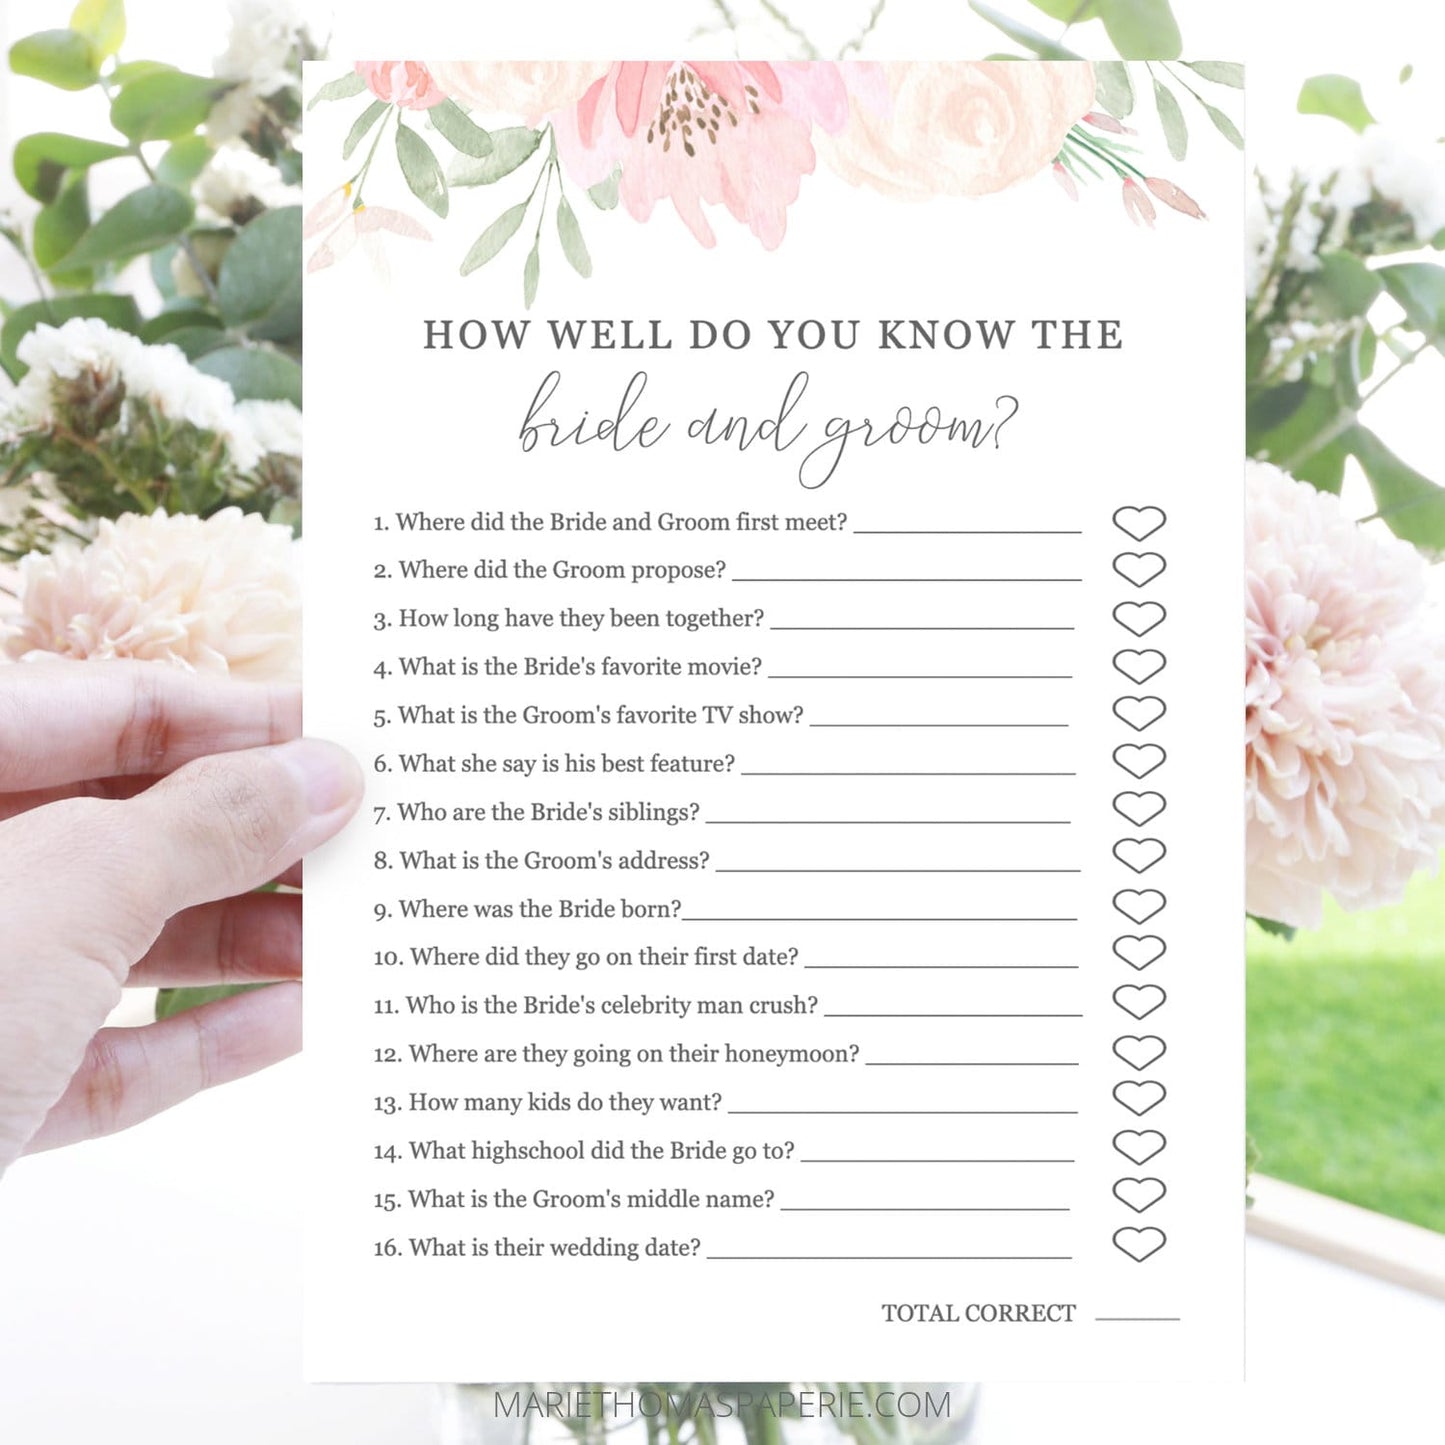 Editable How Well Do You Know the Bride and Groom Bridal Shower Games Wedding Games Template